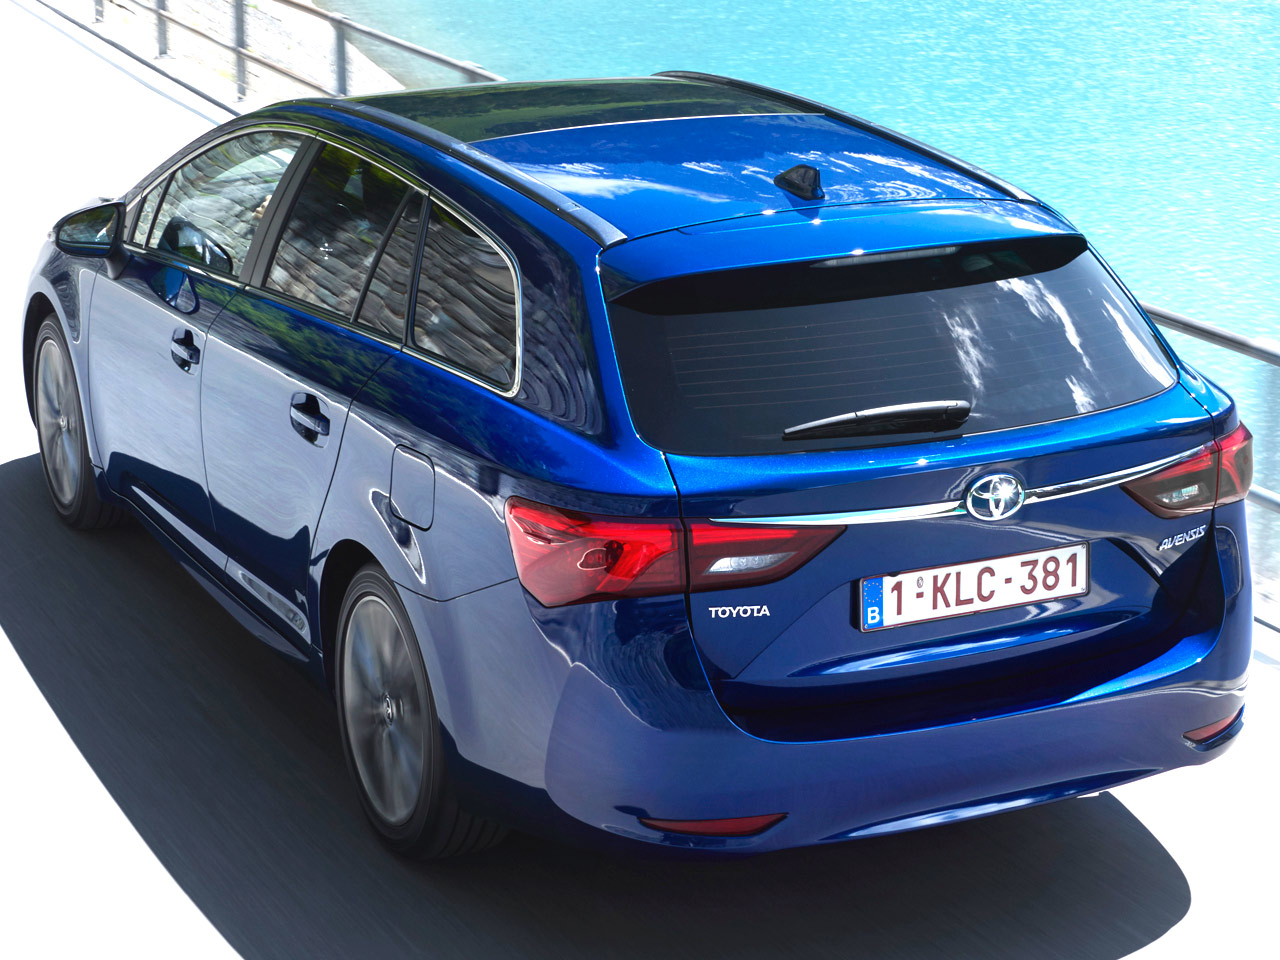 Toyota Avensis Touring Sports 2.0 D-4D: Test